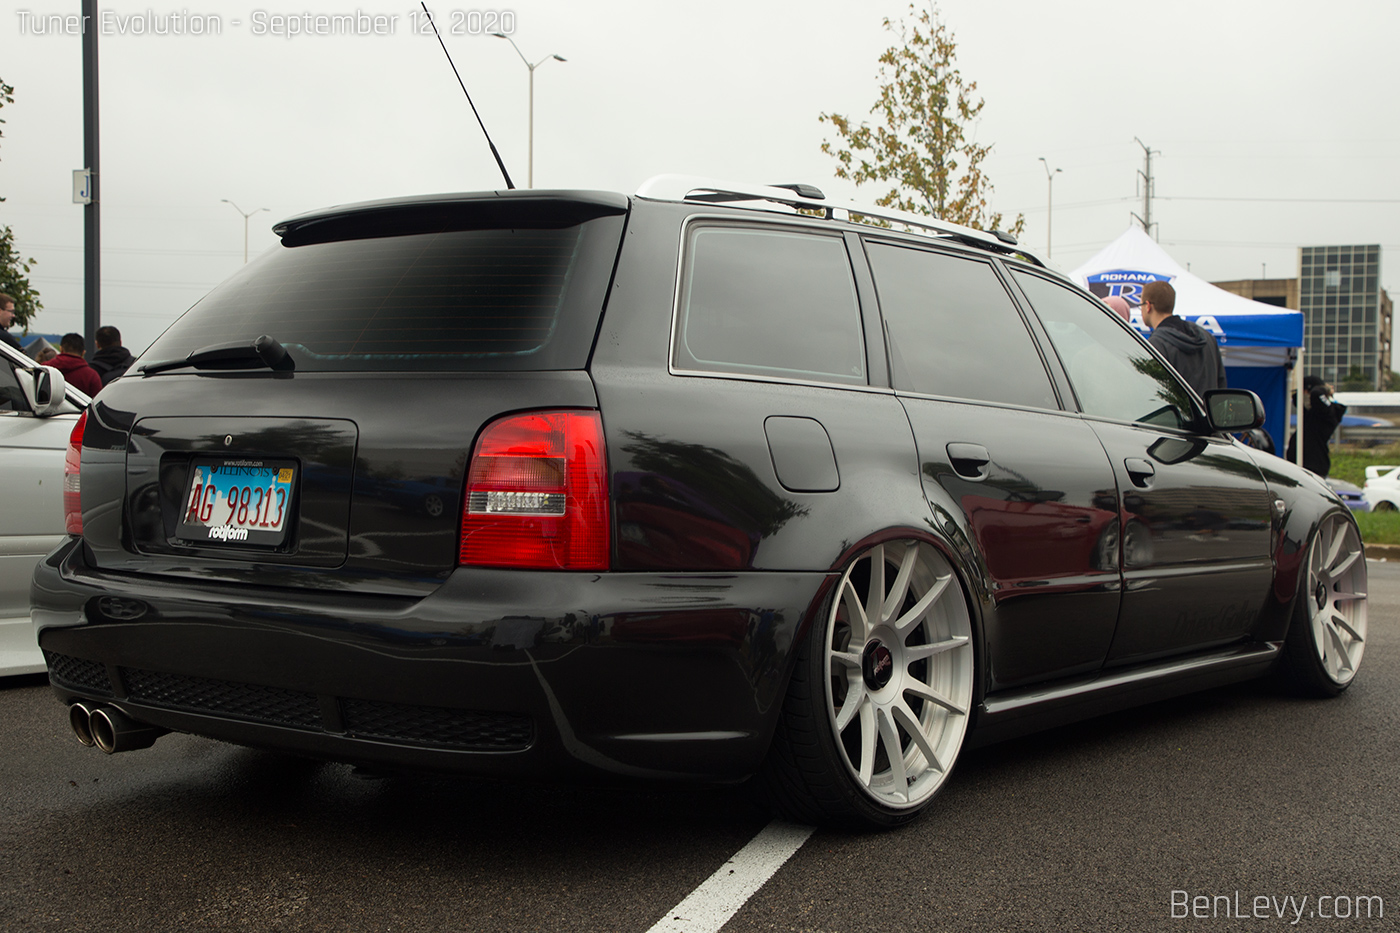 Black Audi S4 with RS4 fenders